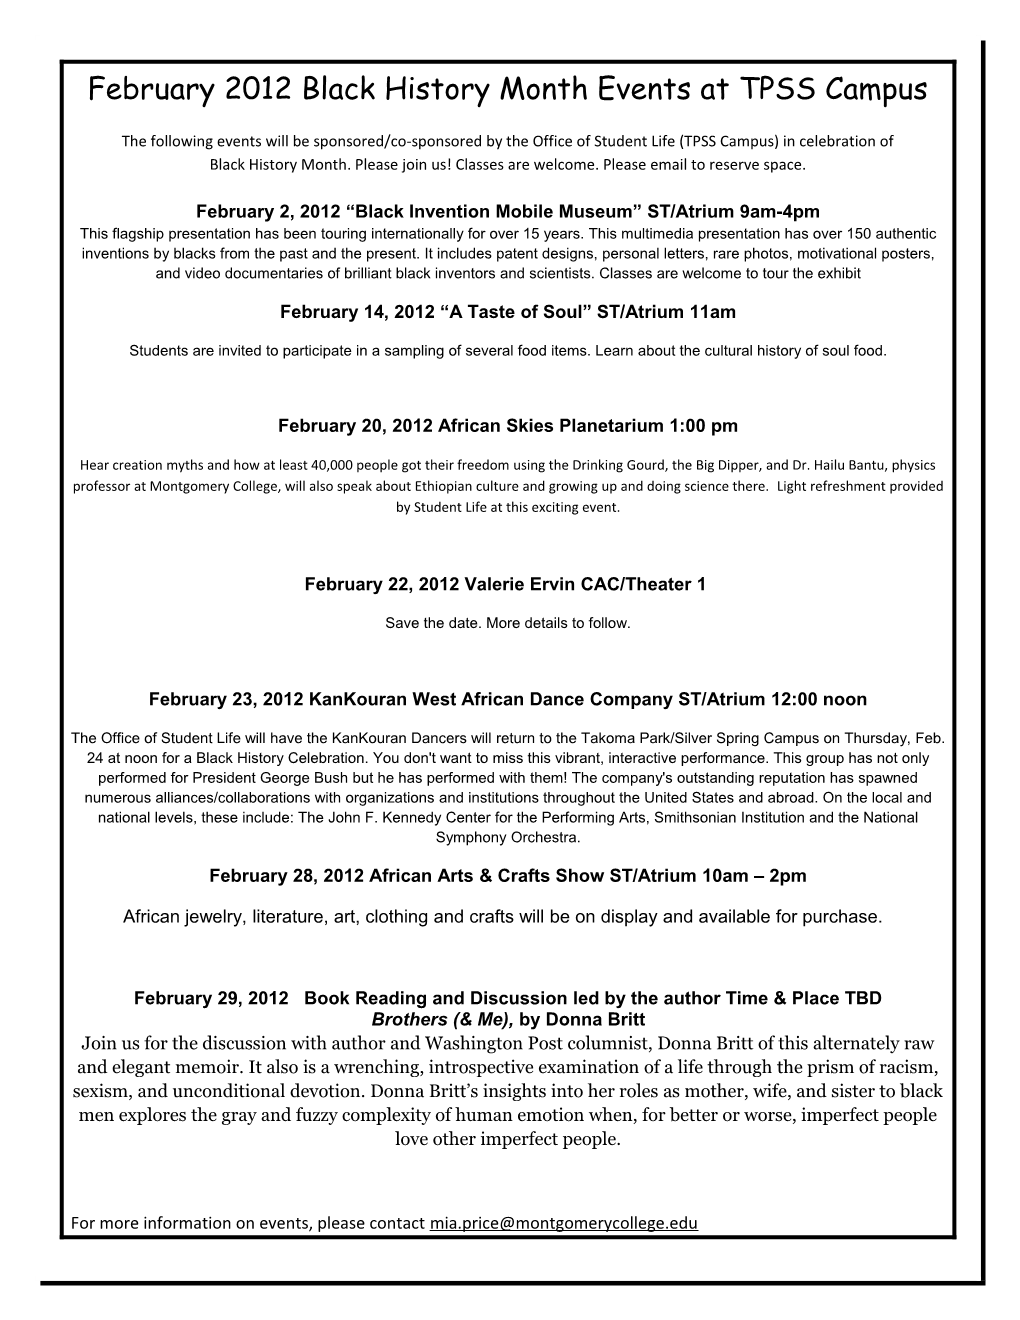 February 2012 Black History Month Events at TPSS Campus